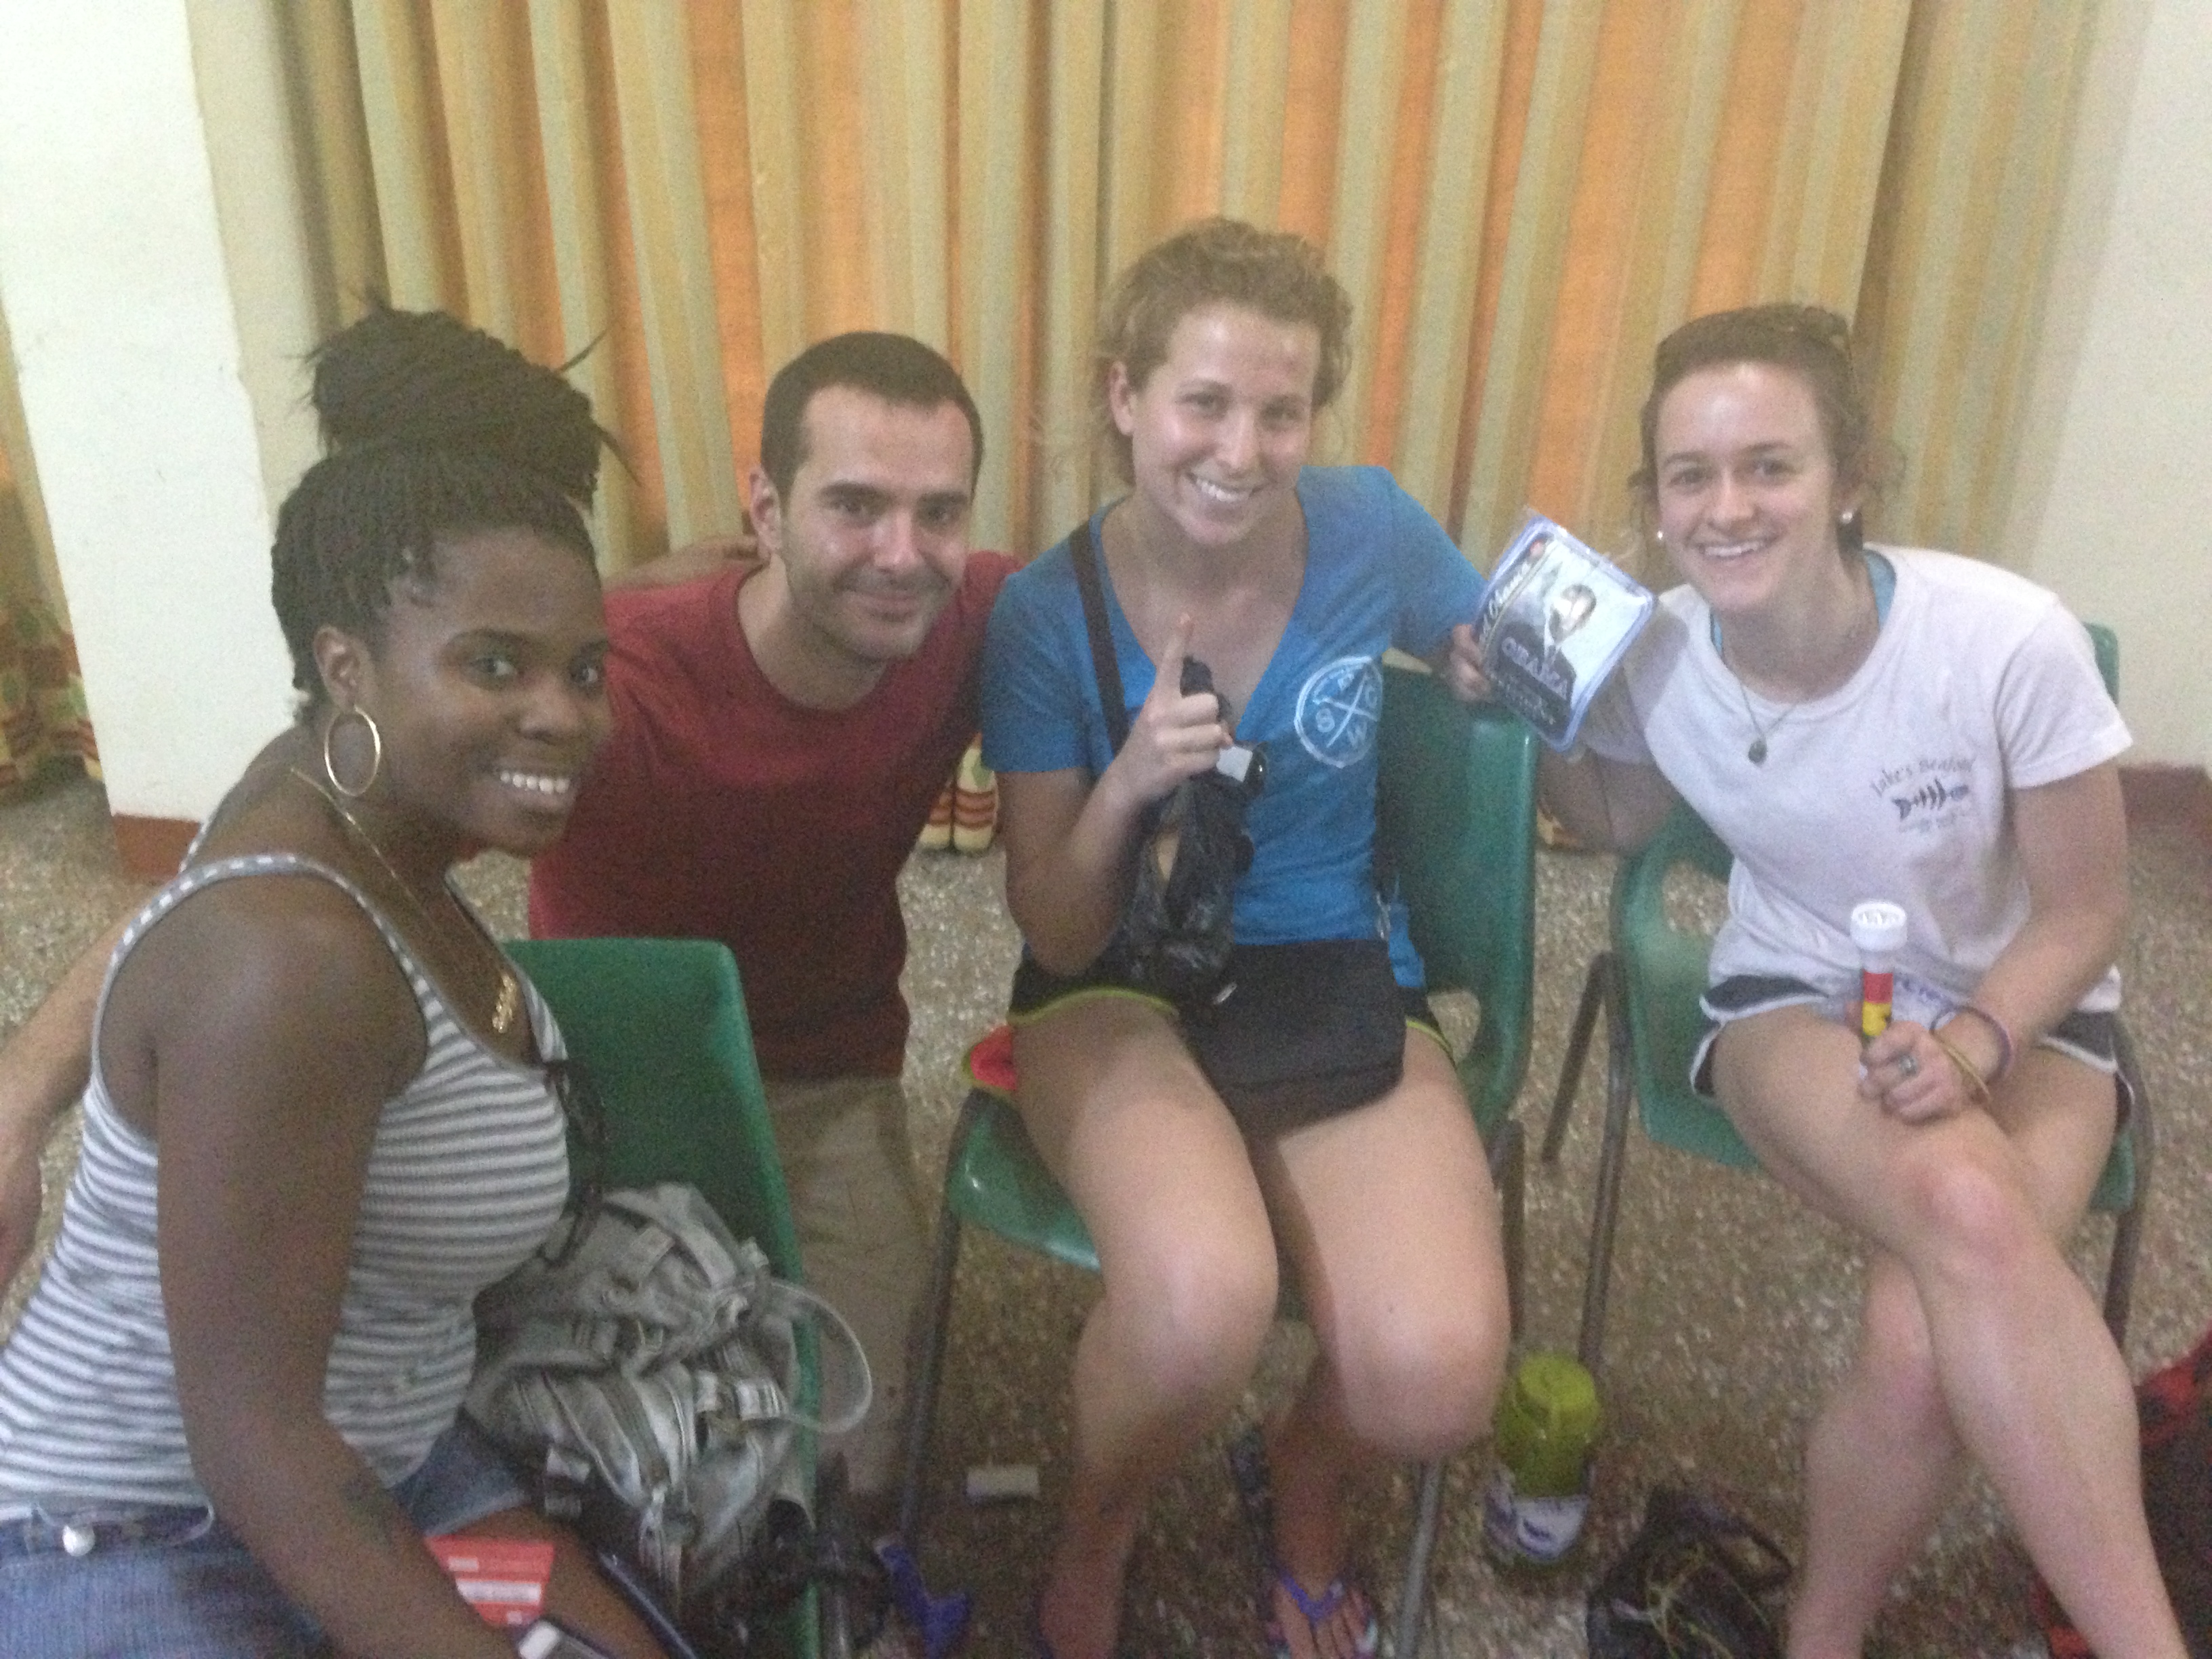 Thalia, Alex, Sara, Emily hanging out at the guest house after the scavenger hunt.